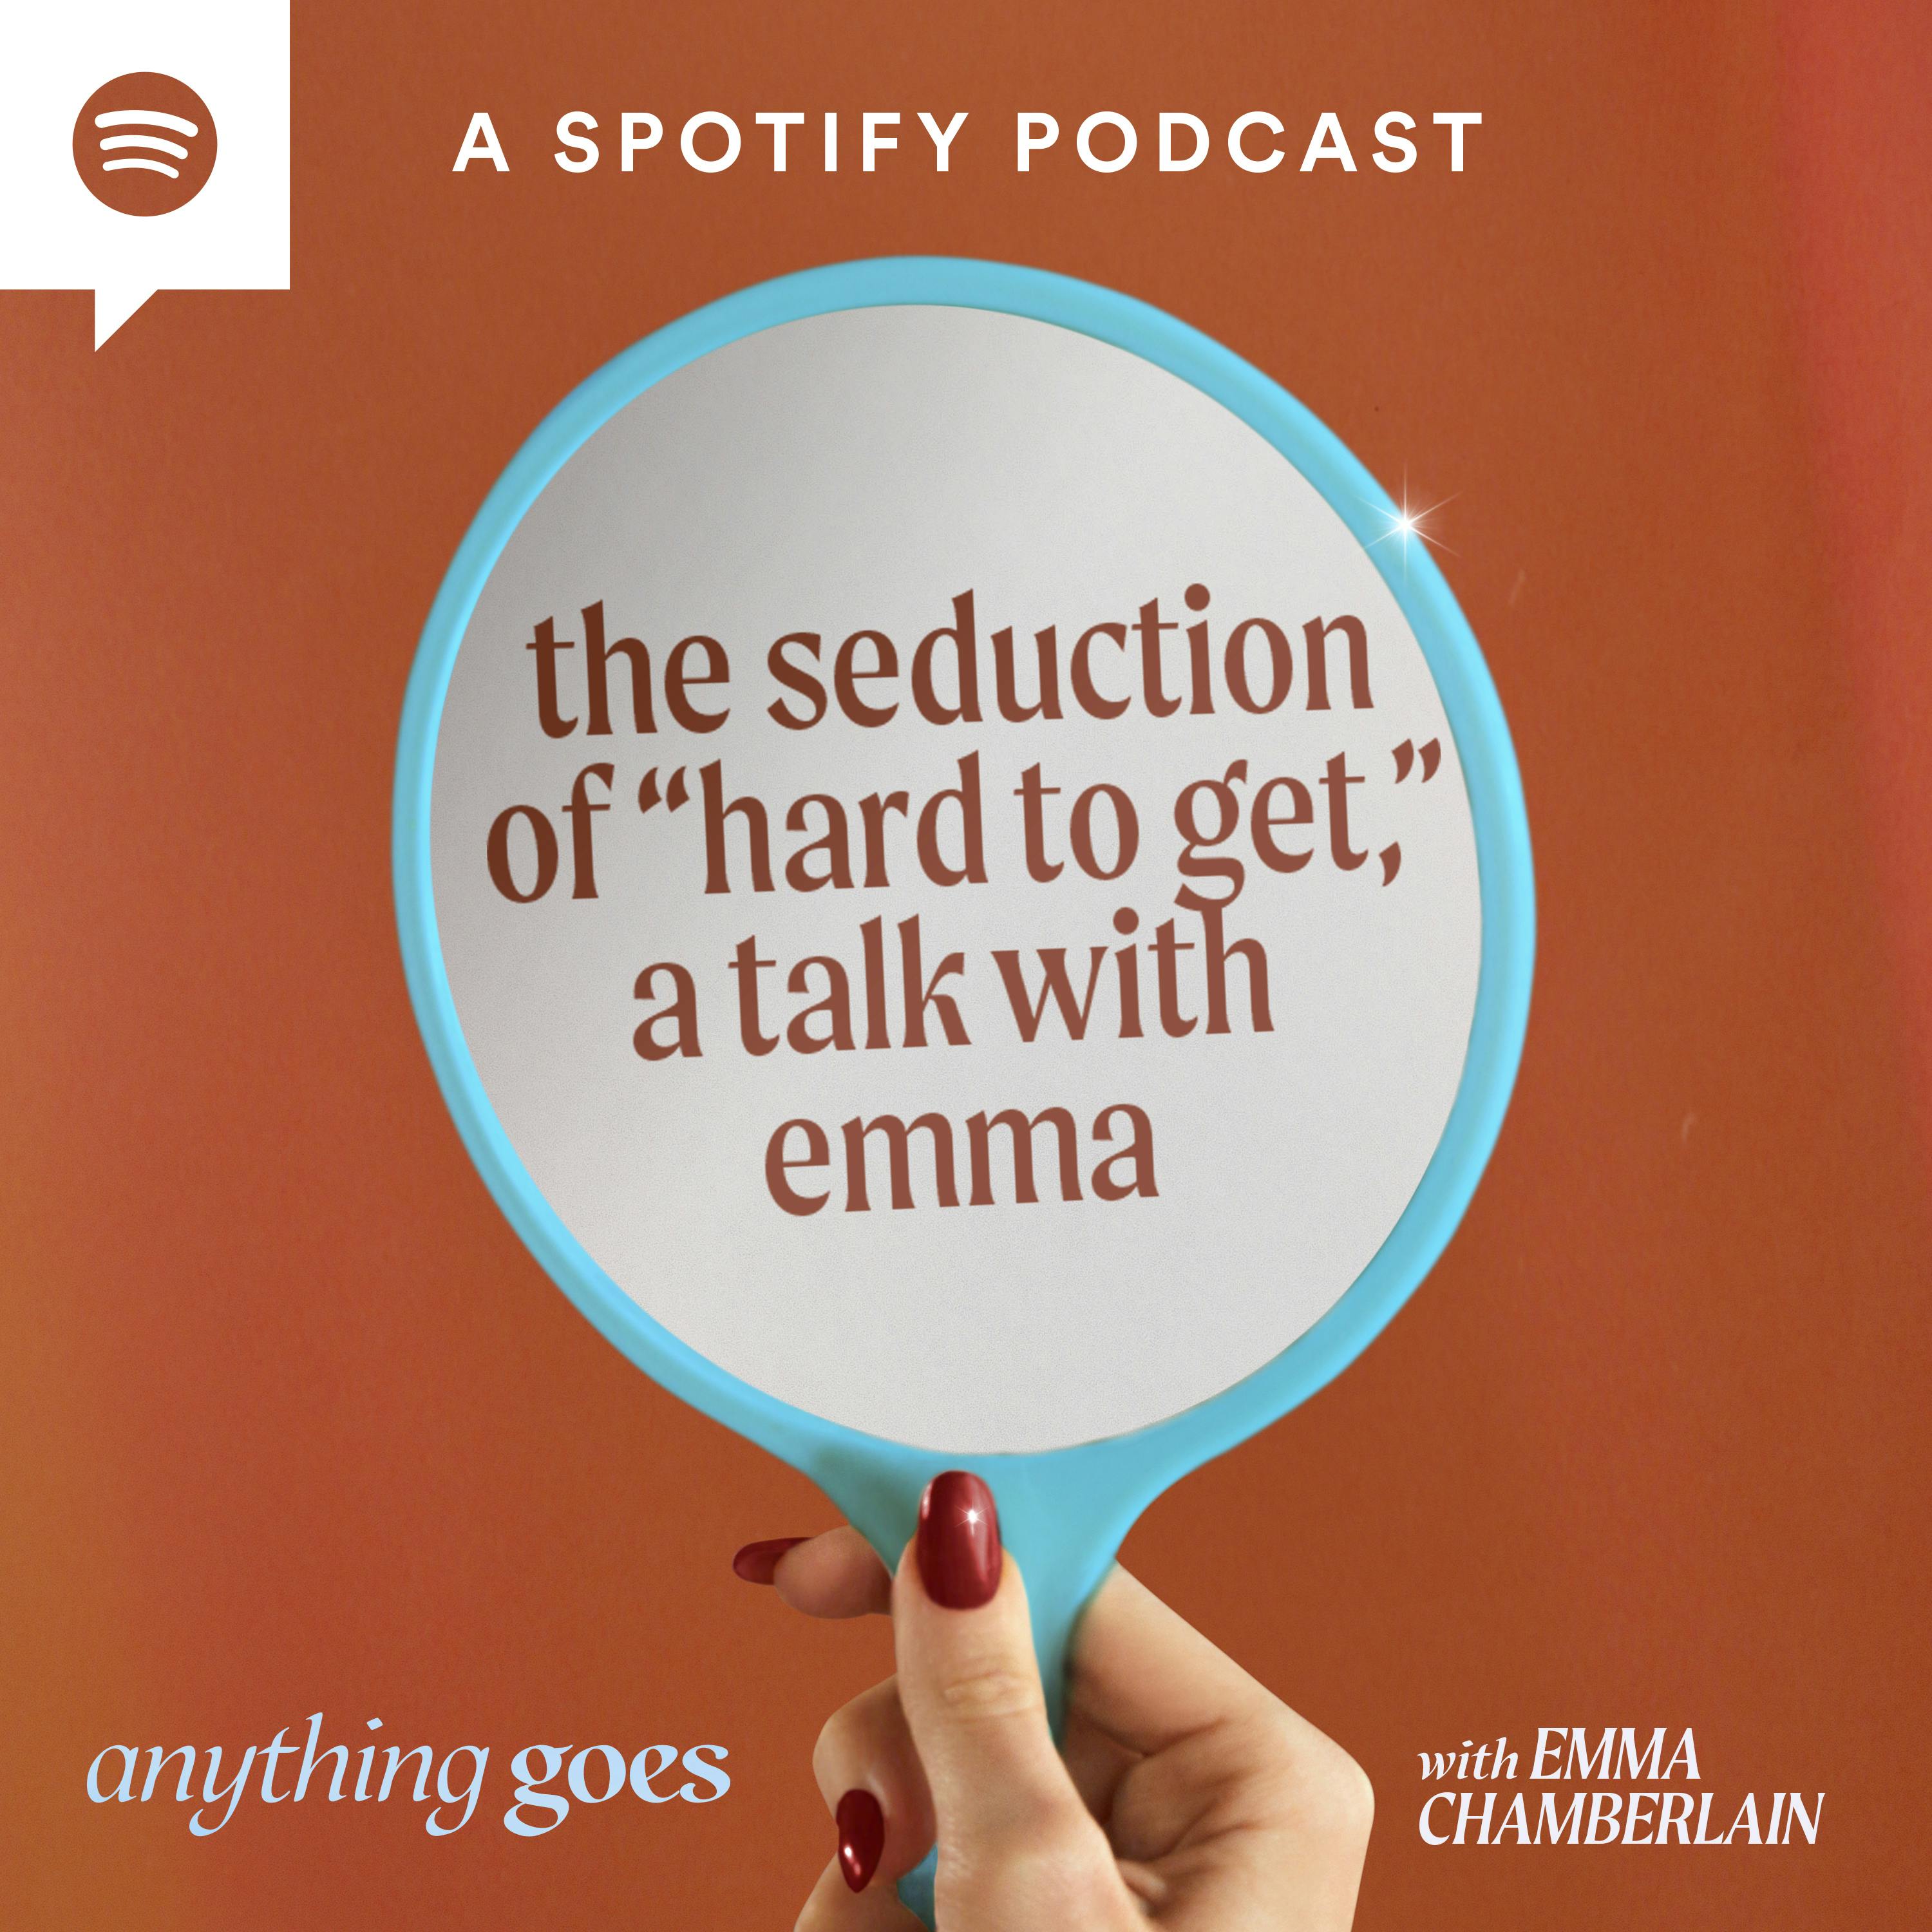 the seduction of ”hard to get,” a talk with emma